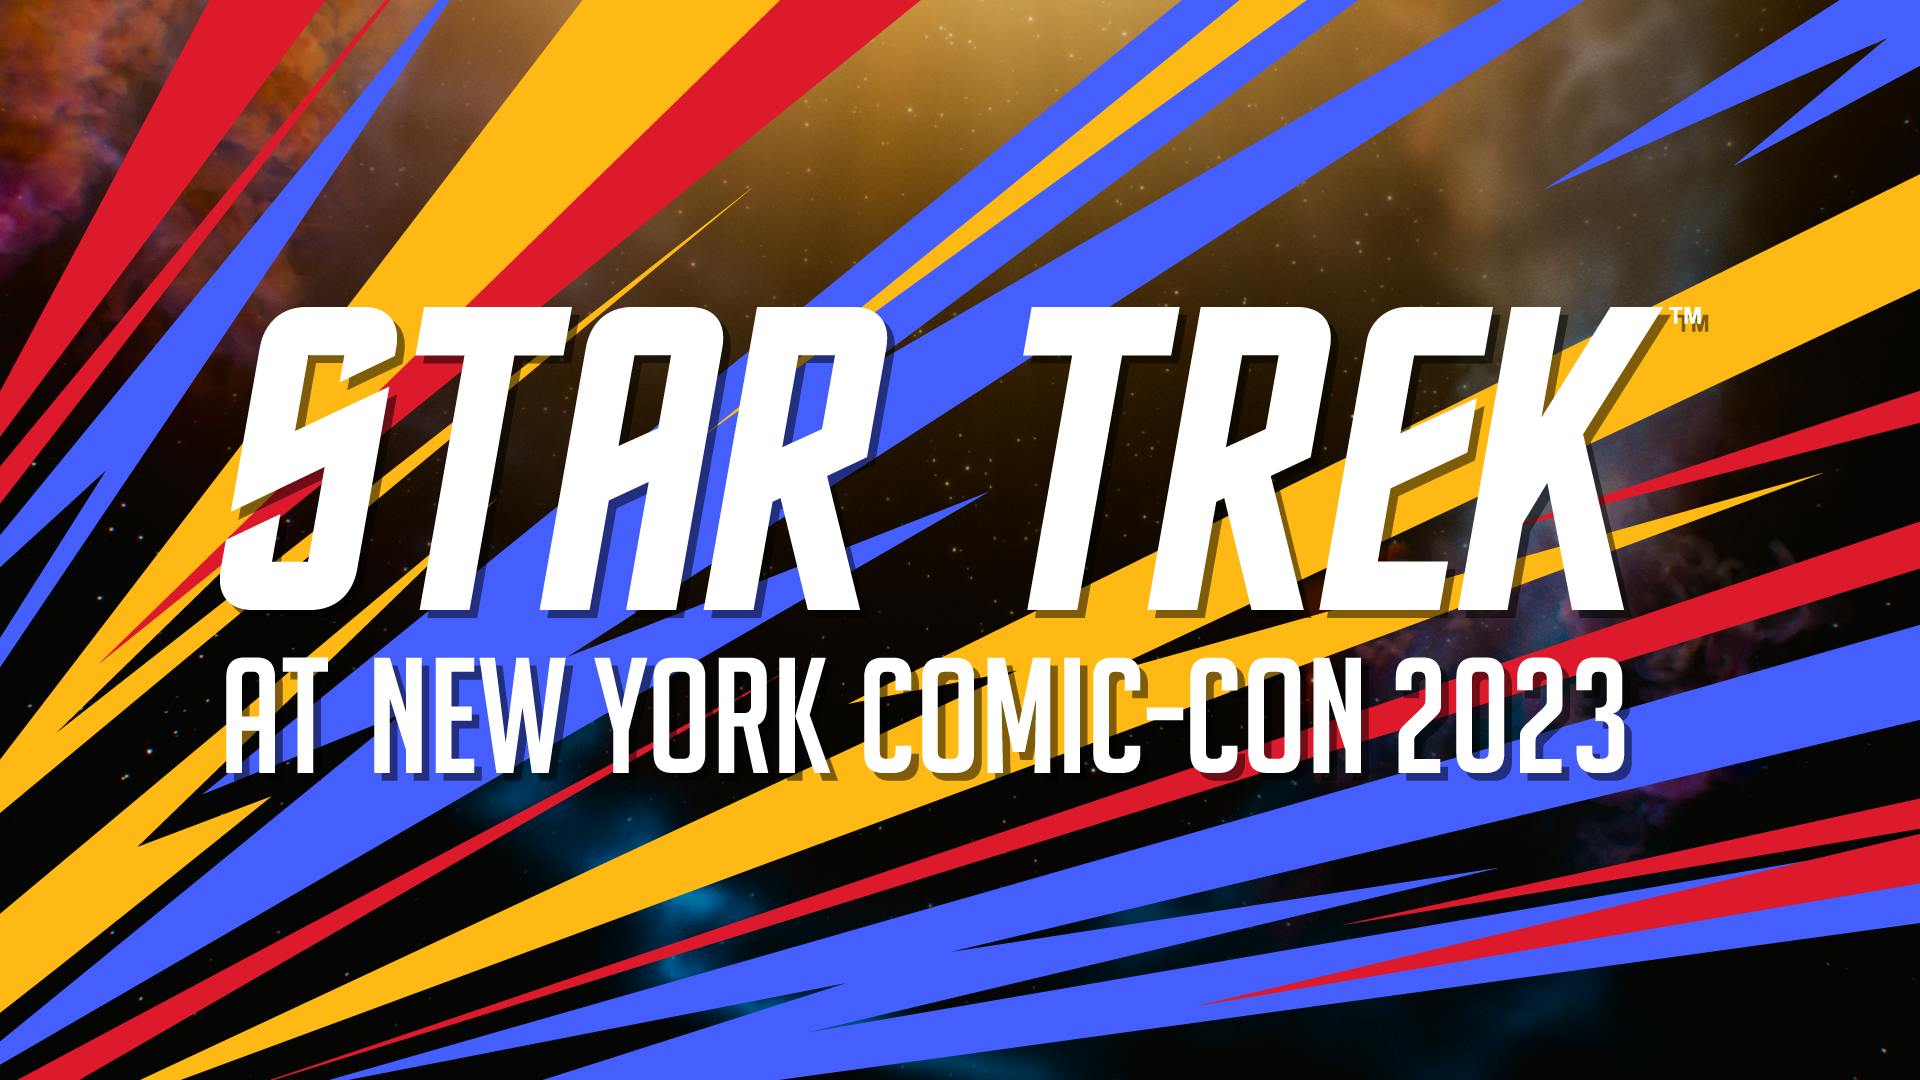 Banner with the text 'Star Trek at New York Comic Con 2023'